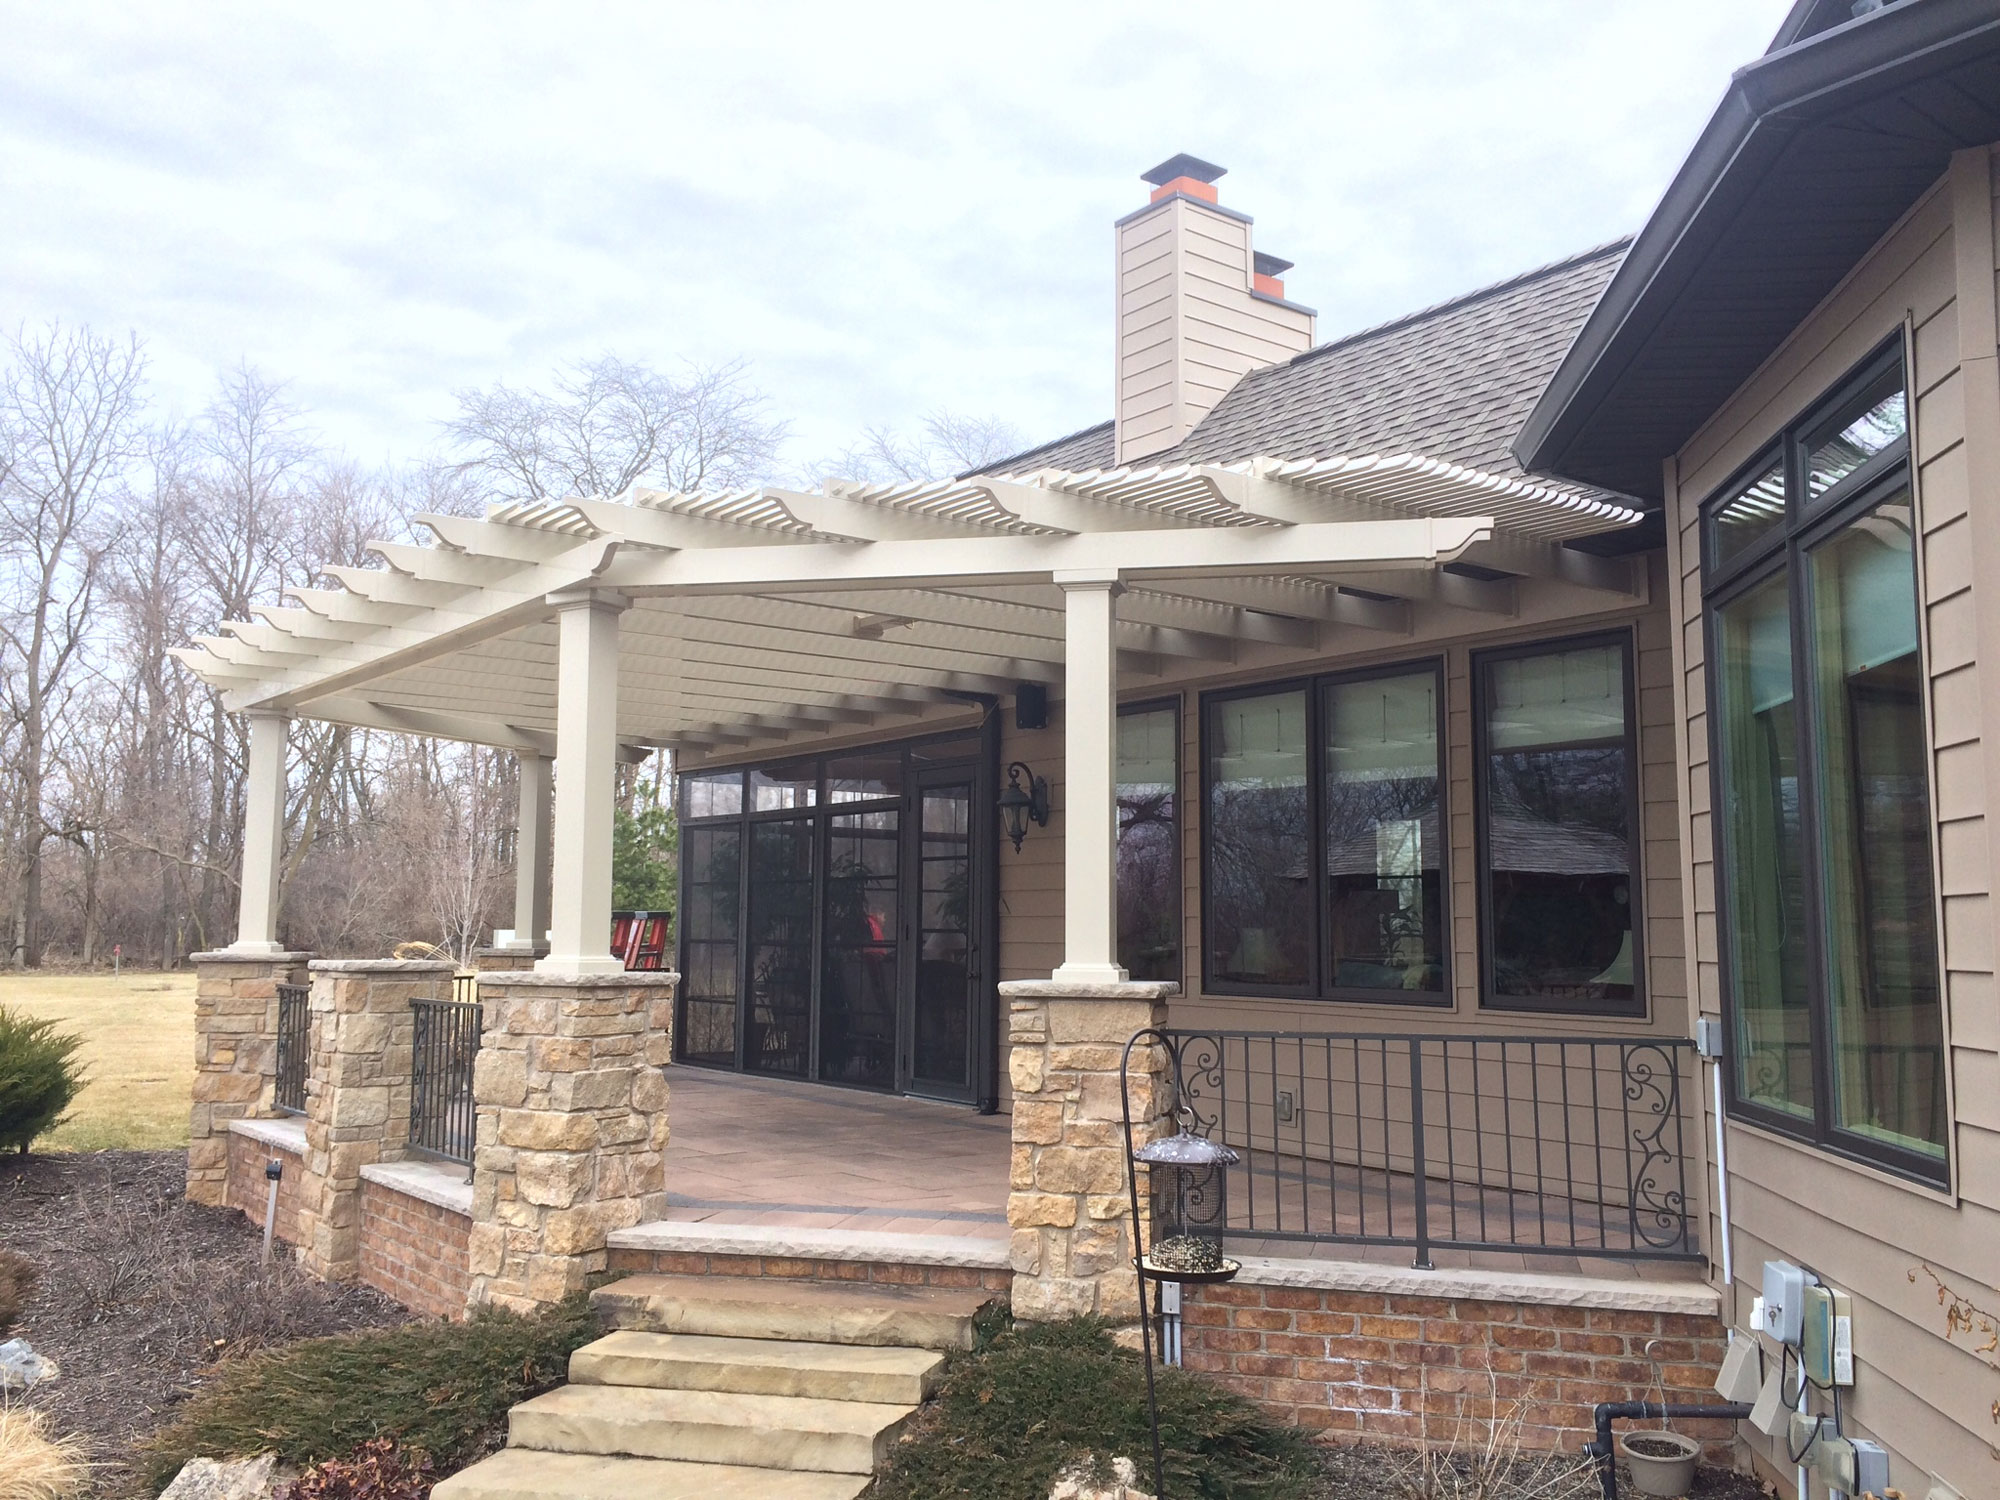 This brown home installed a tan pergola to cover their back porch. They have stone column connecting the pergola to the foundation, along with stone steps leading to the deck area.